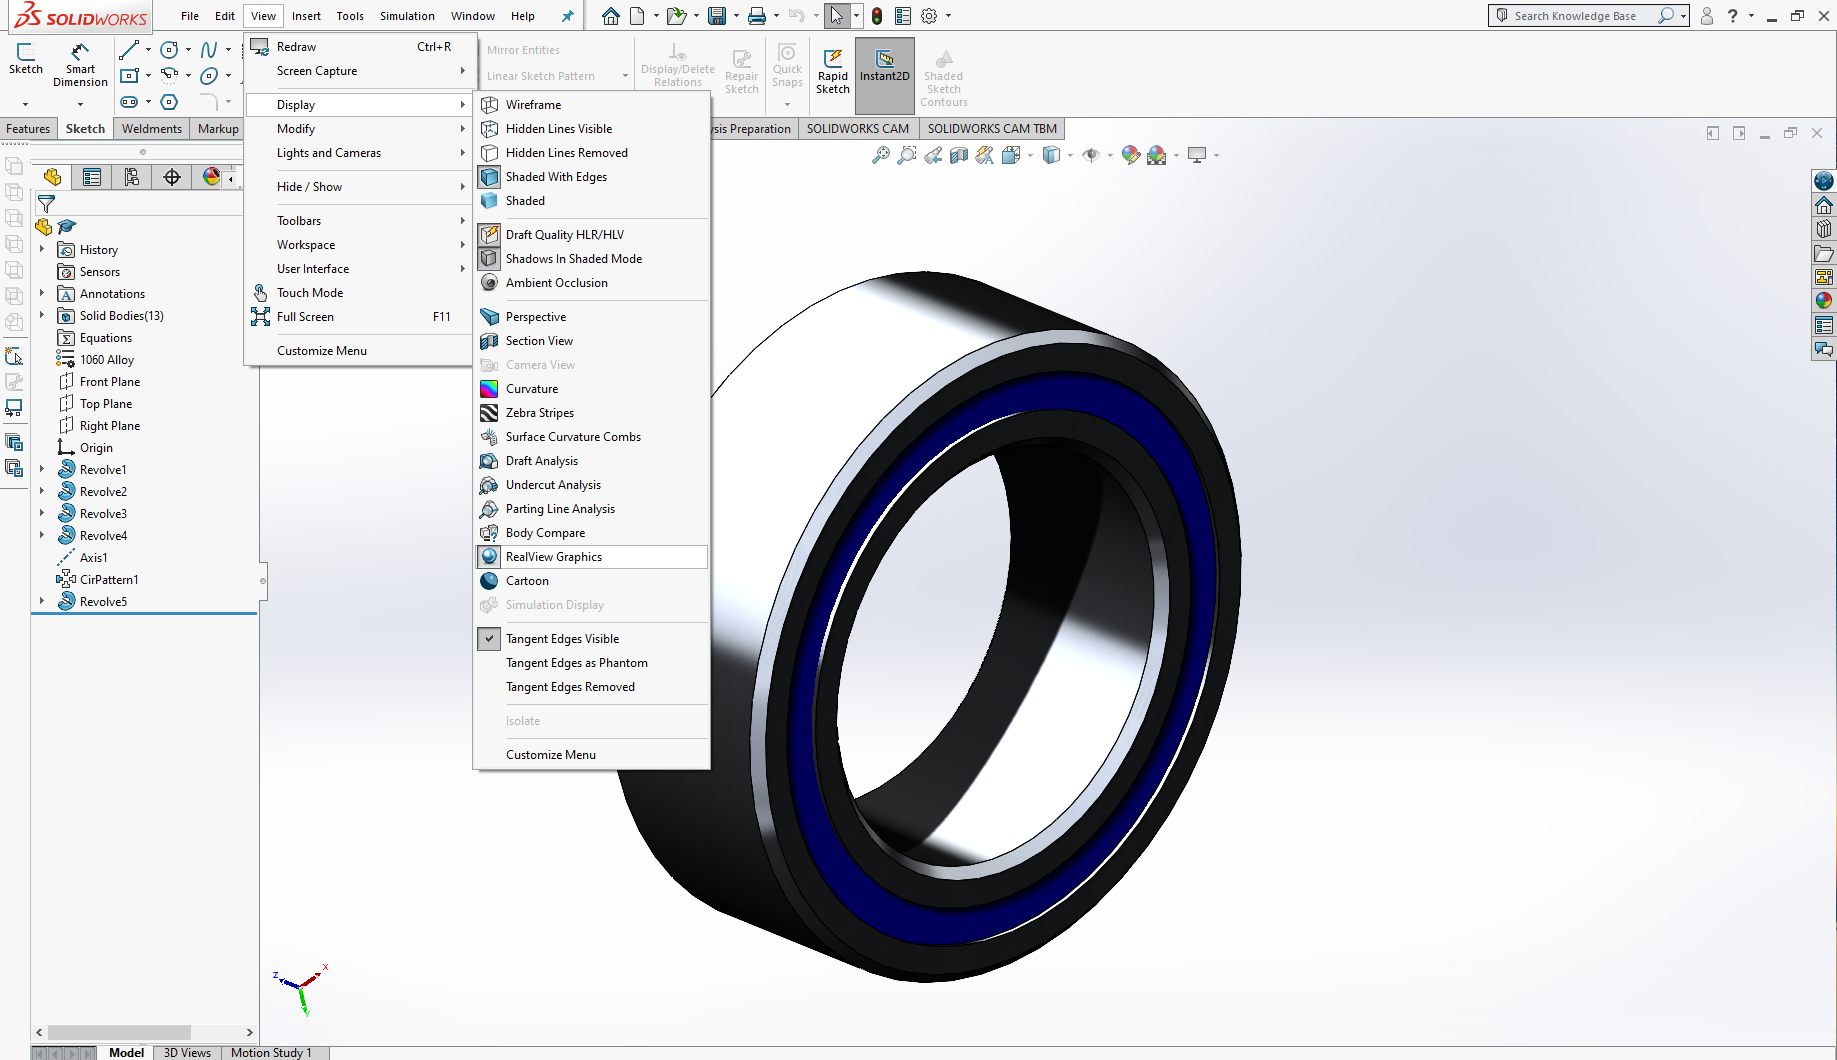 solidworks graphics driver download